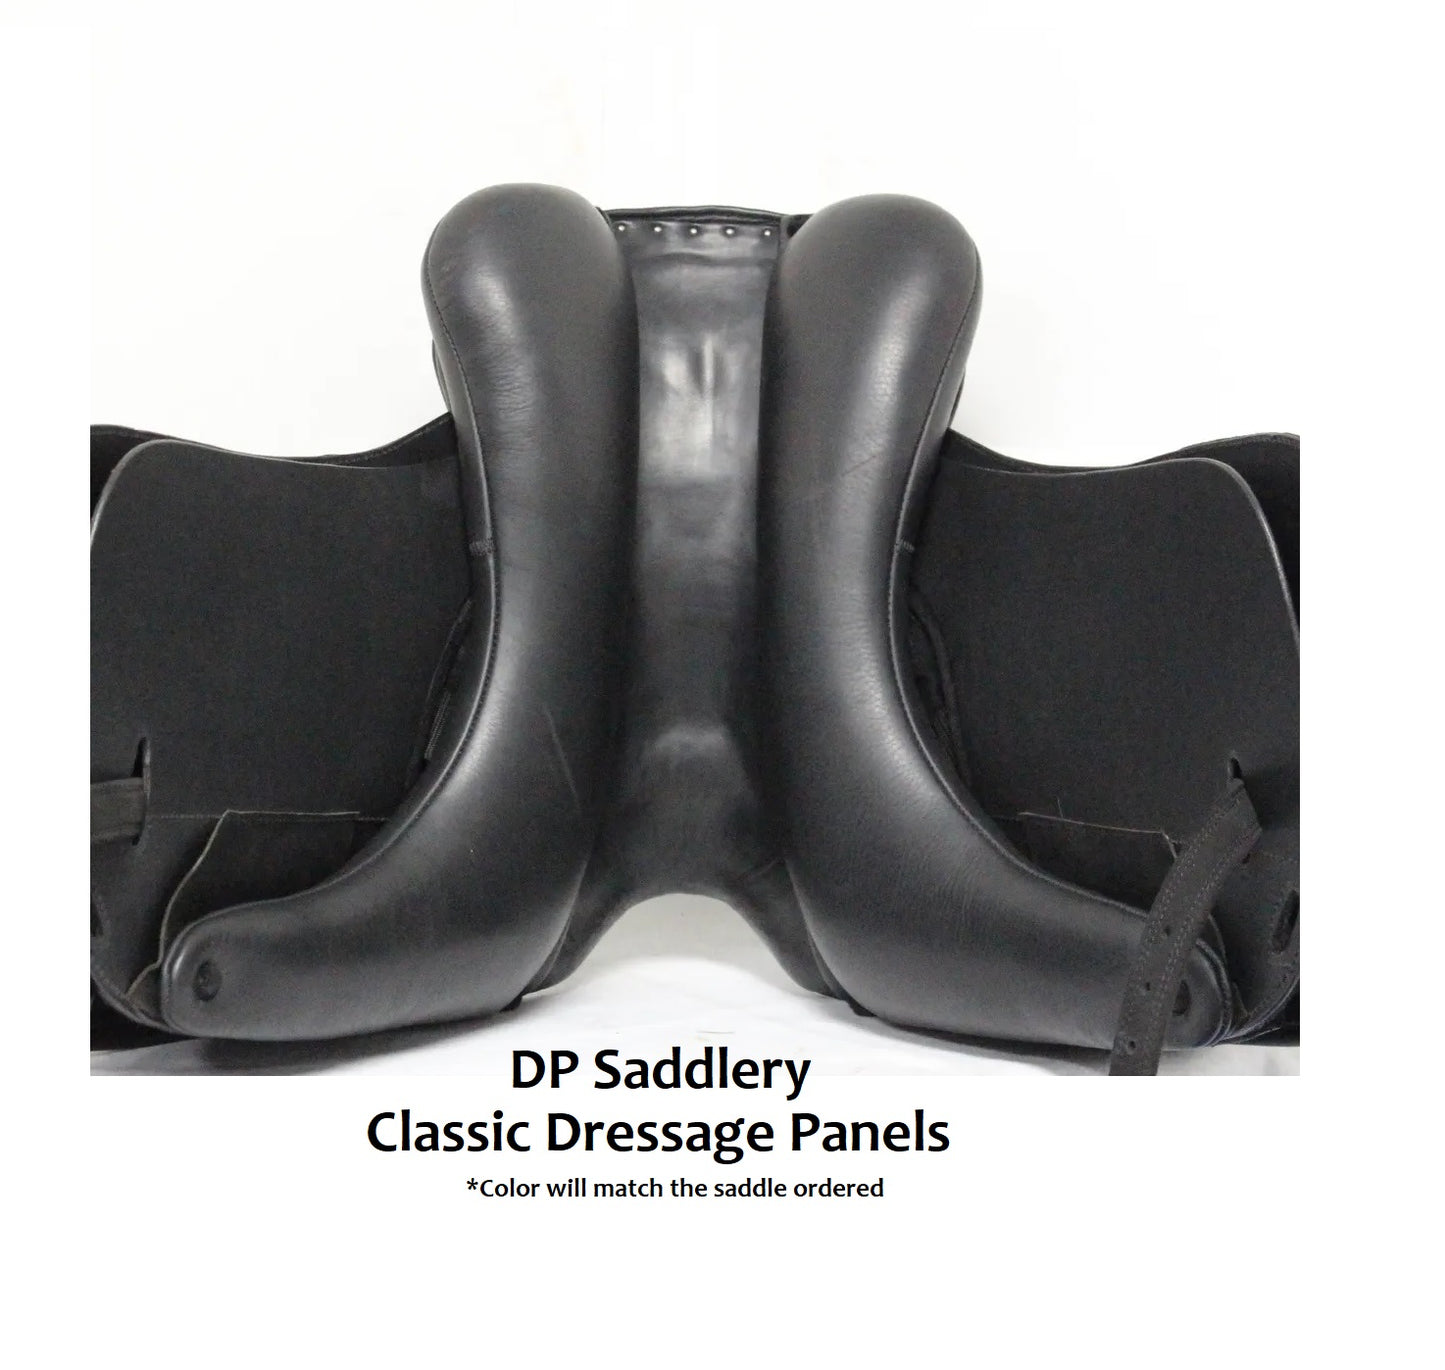 DP Saddlery Classic Dressage 5609 18 in